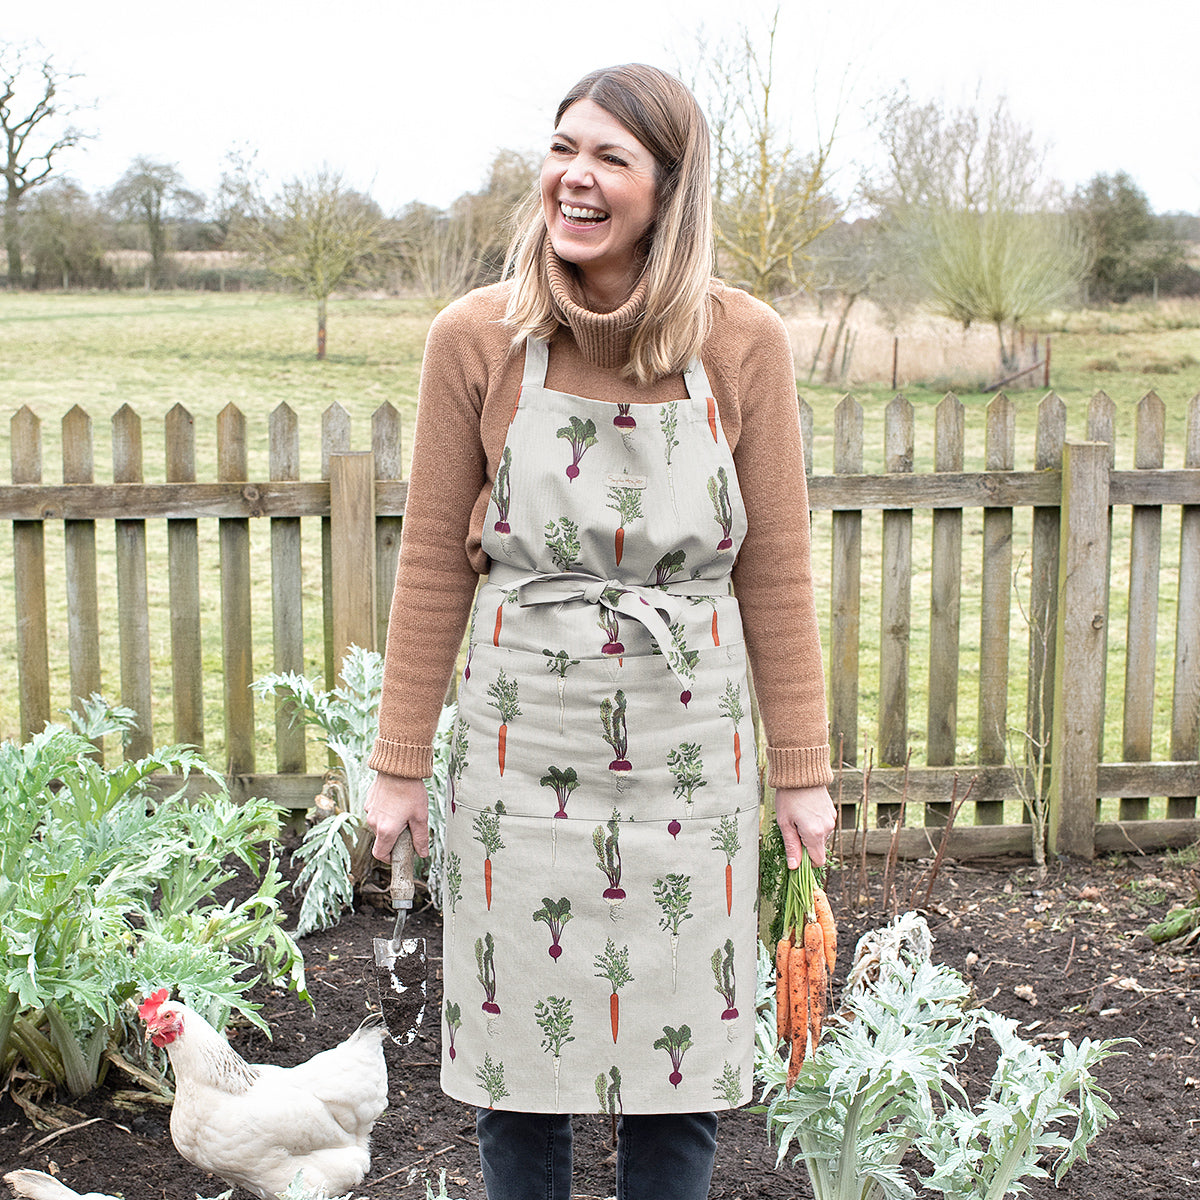 Home Grown Adult Apron by Sophie Allport